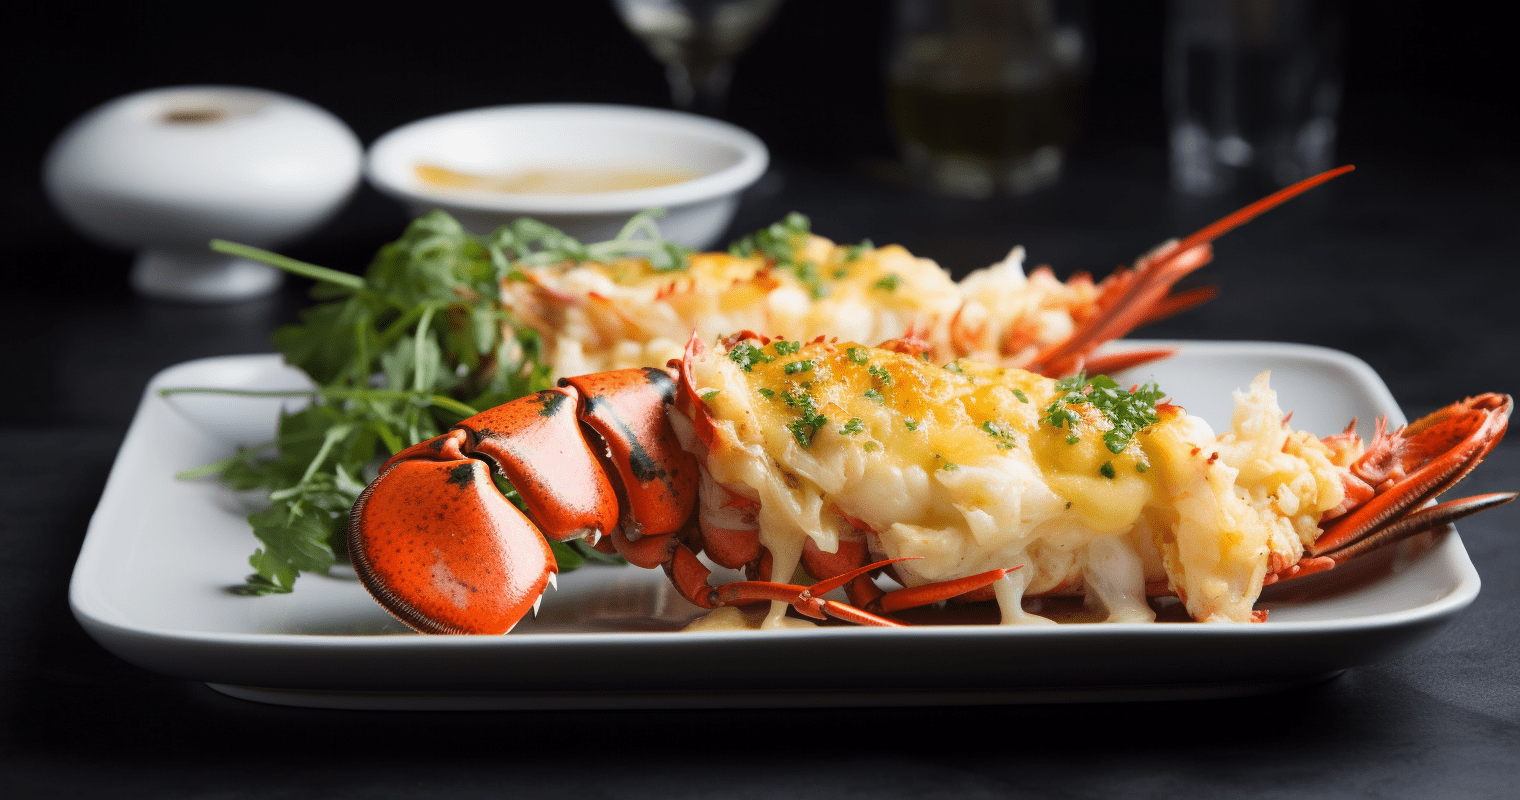 The Indulgent Delight of Lobster Thermidor